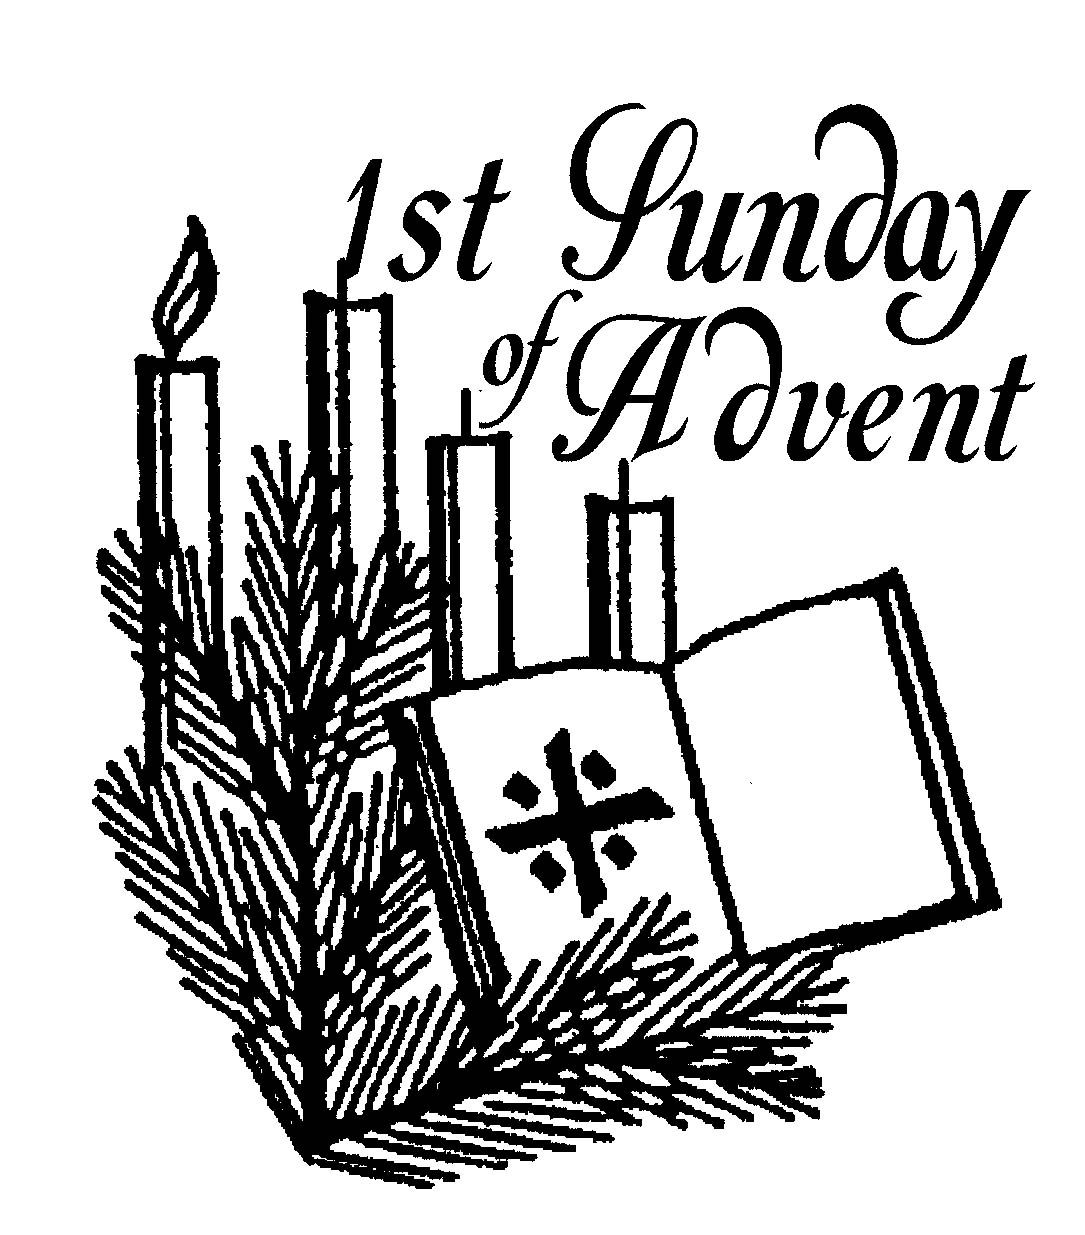 Free Advent Clipart, Download Free Clip Art, Free Clip Art on.